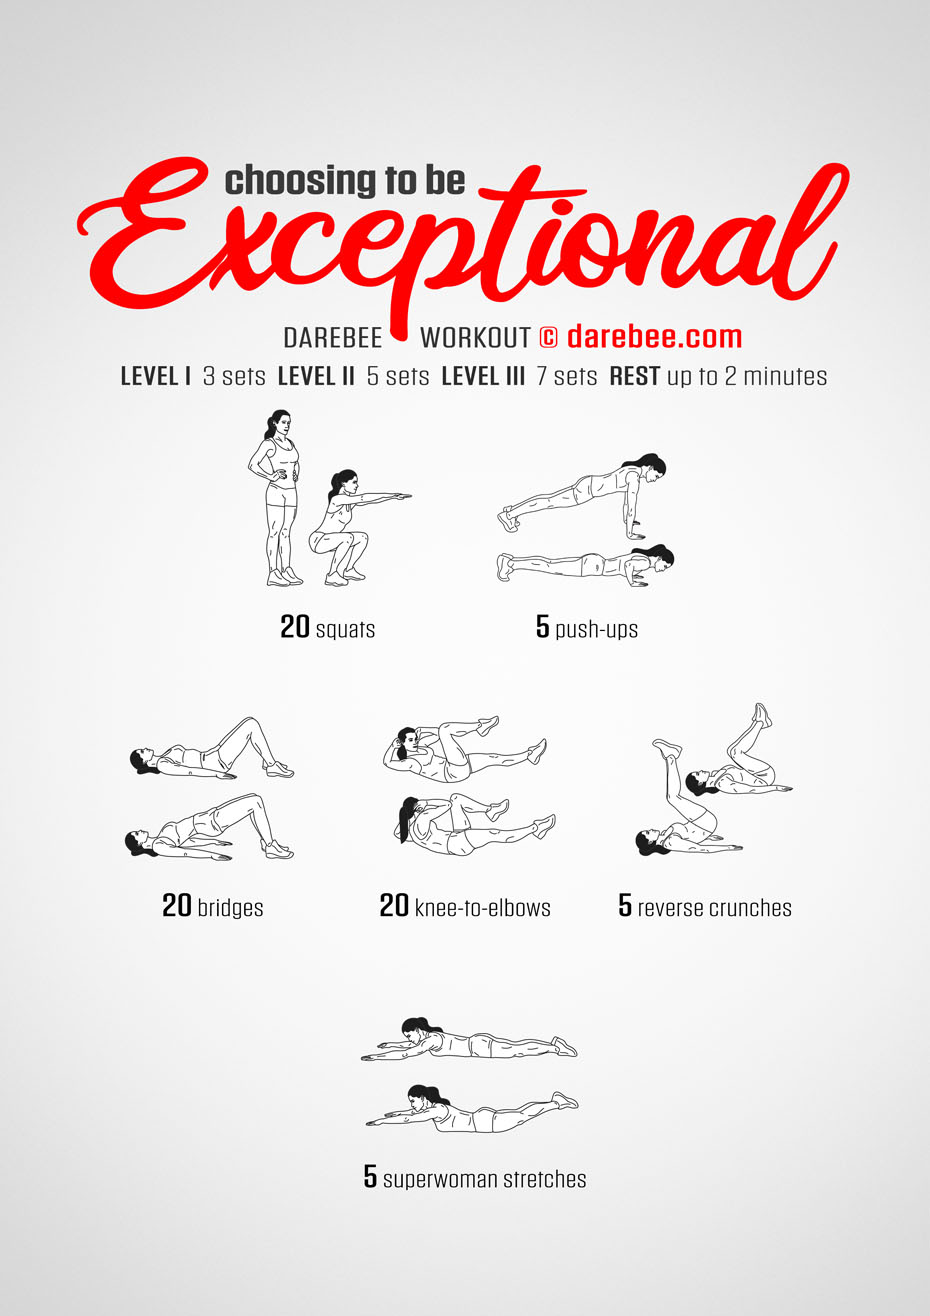 Choosing To Be Exceptional is a Darebee no-equipment workout that lives fully up to its name.